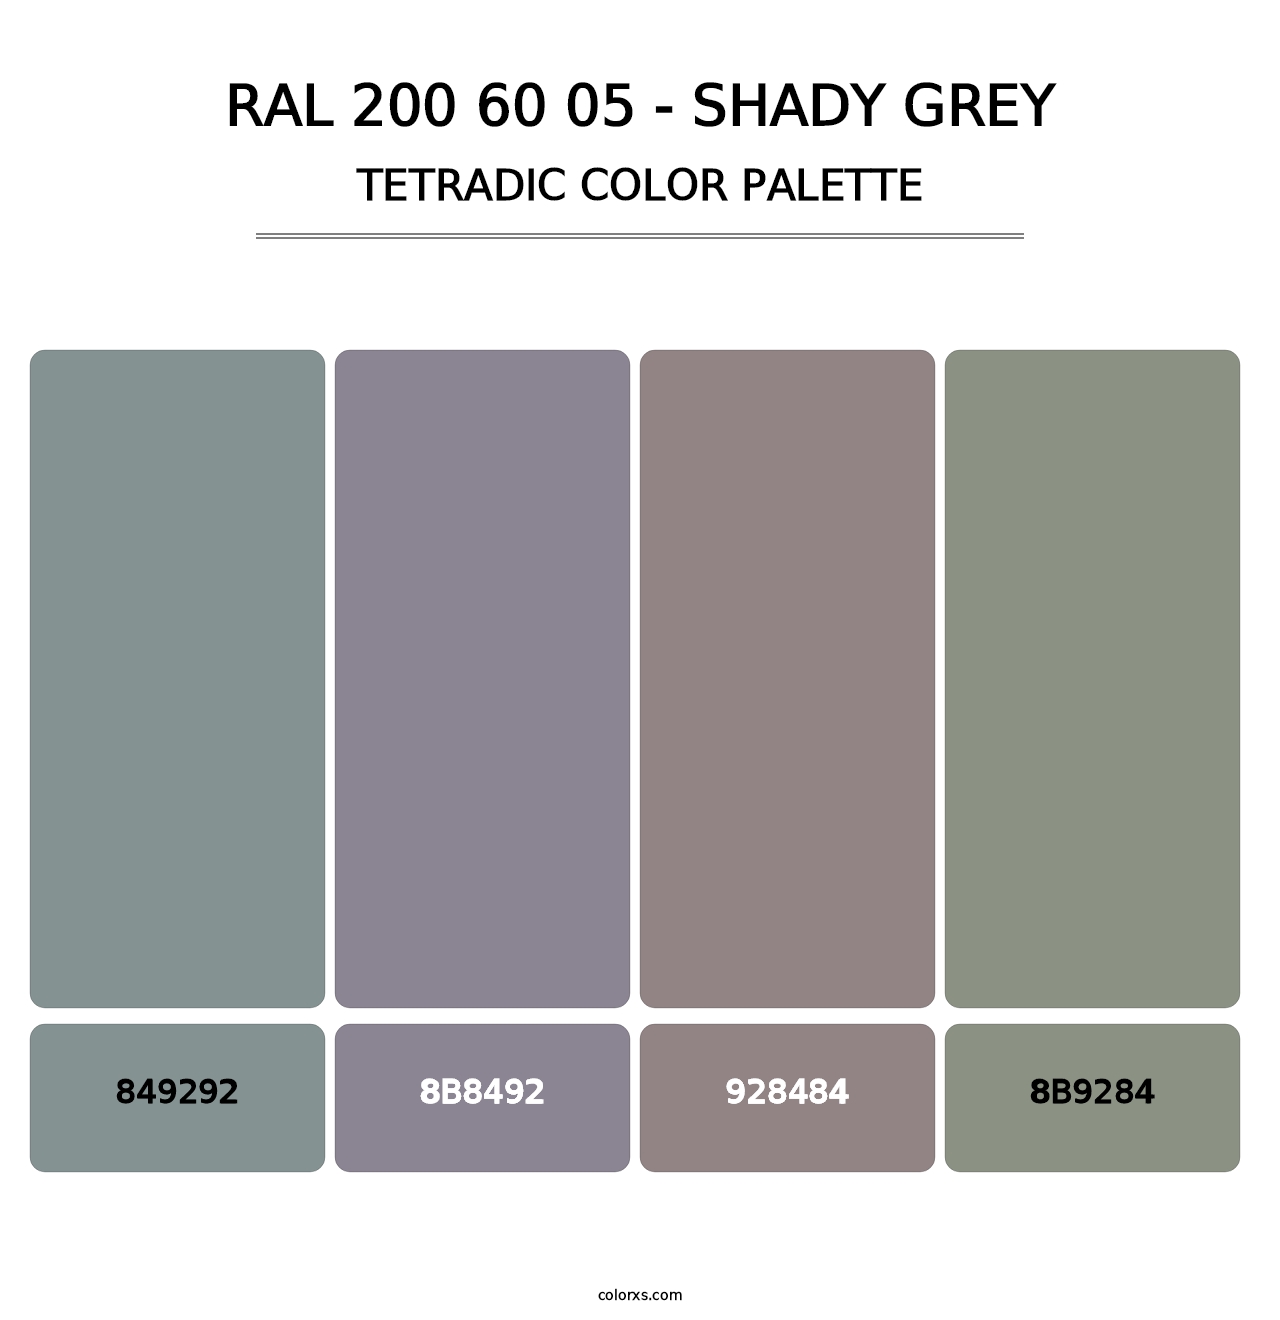 RAL 200 60 05 - Shady Grey - Tetradic Color Palette